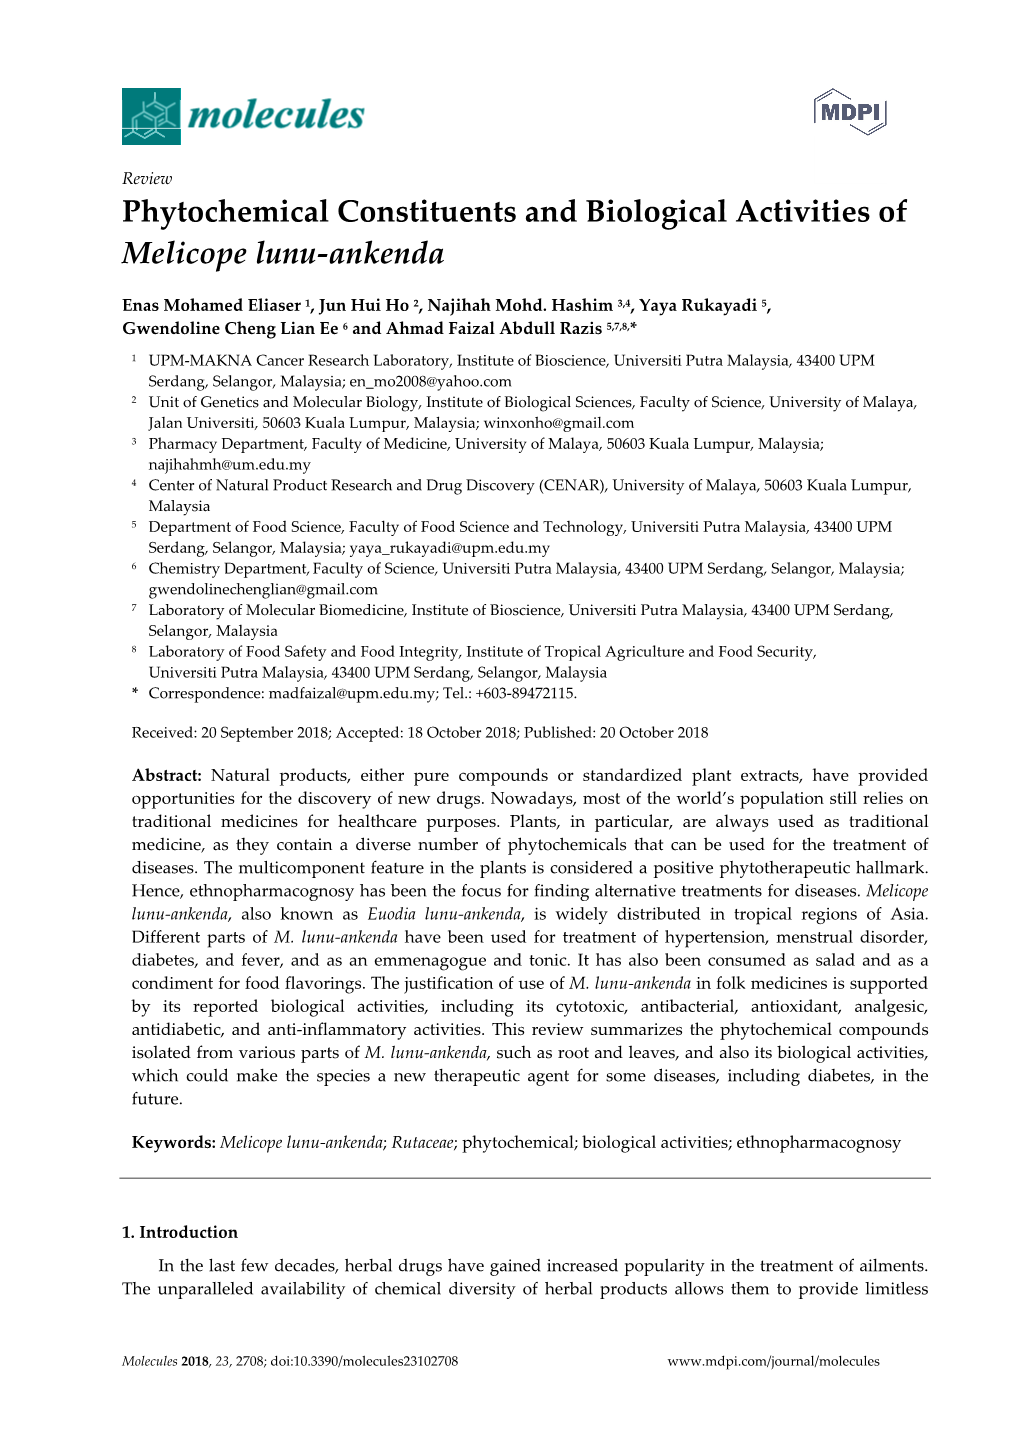 Phytochemical Constituents and Biological Activities of Melicope Lunu-Ankenda